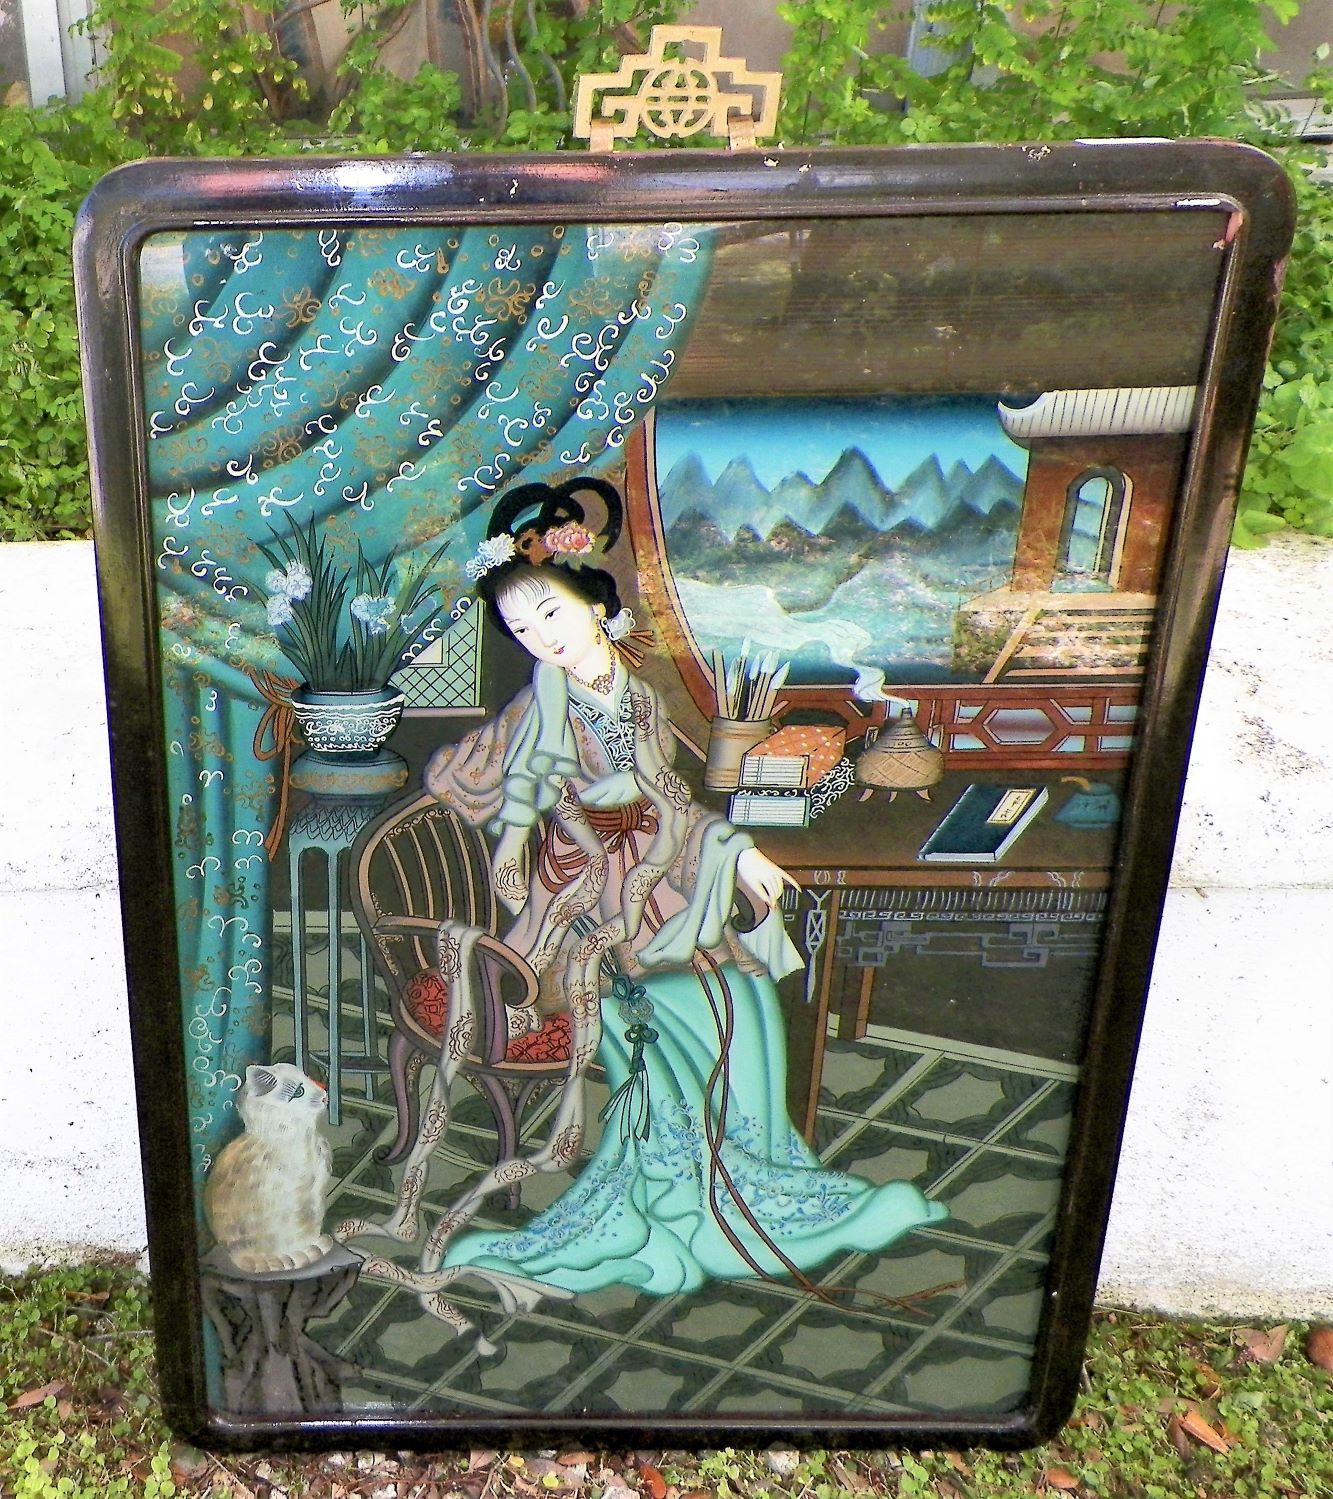 CHINESE REVERSE PAINTED ON GLASS PAINTINGS | Antiques Board